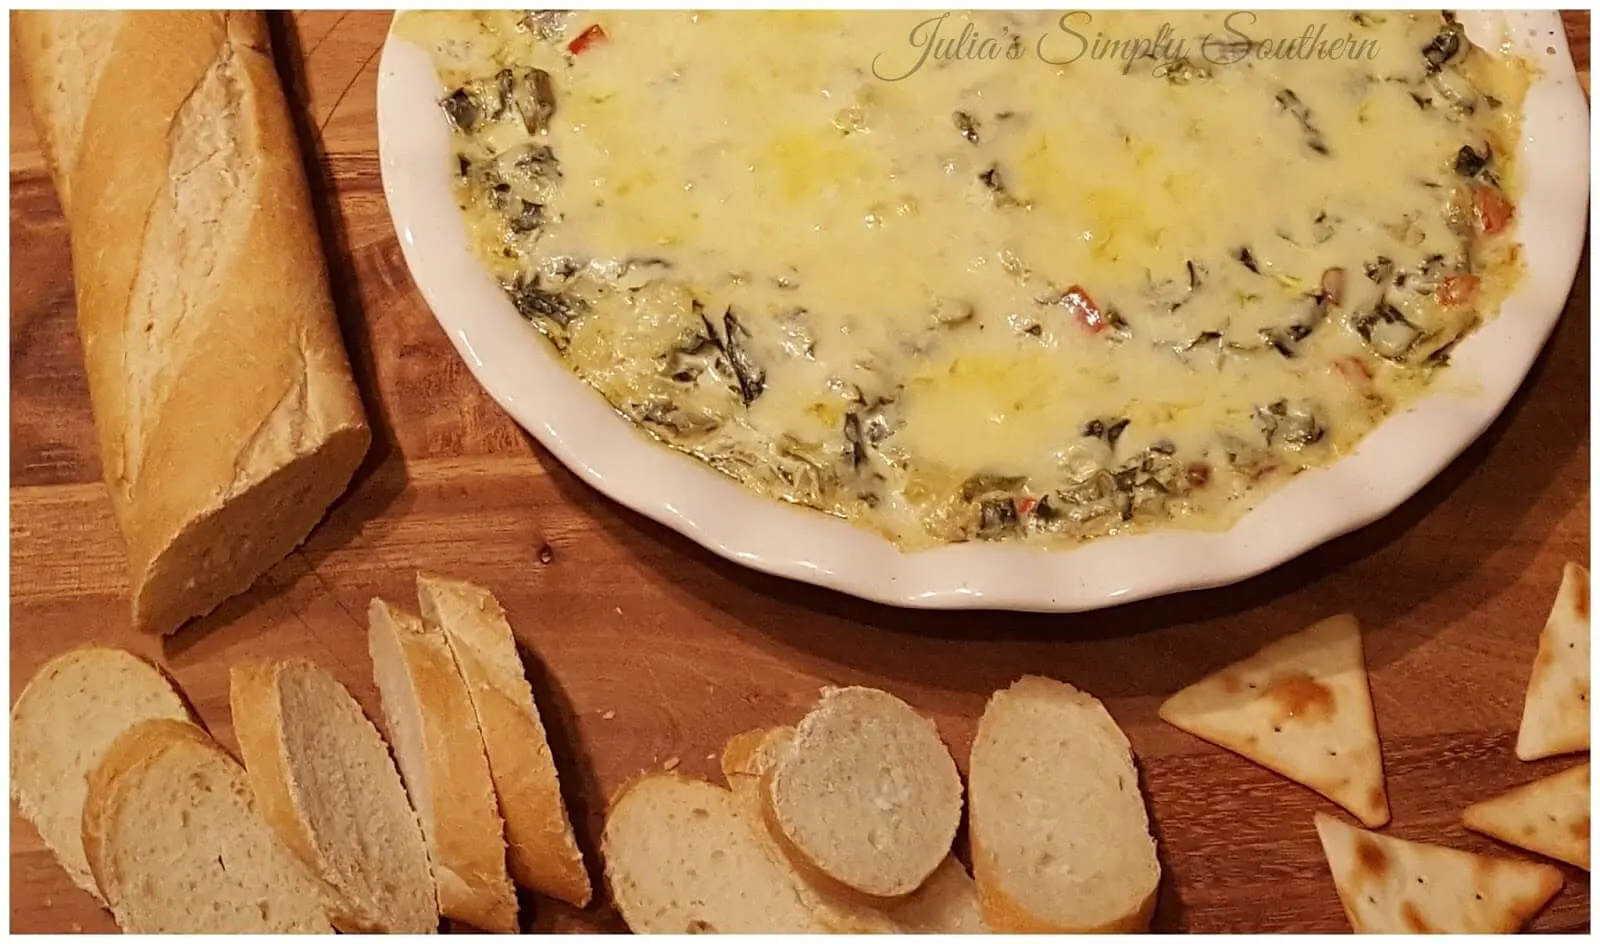 Hot dip recipes with artichoke and collards